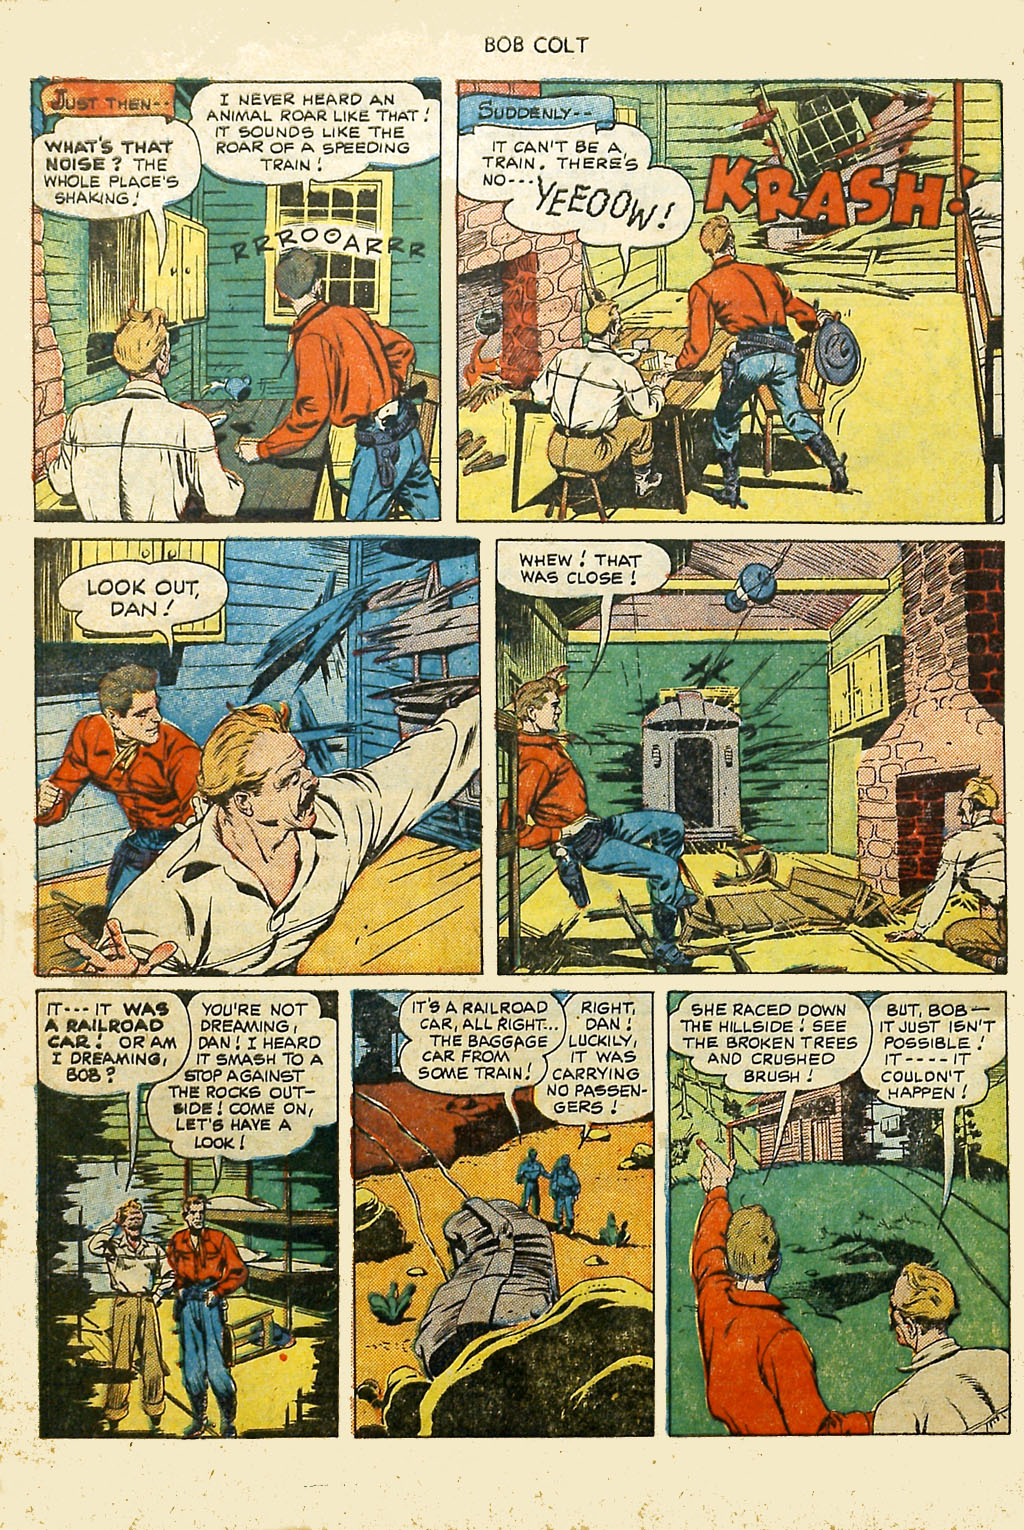 Read online Bob Colt Western comic -  Issue #2 - 4